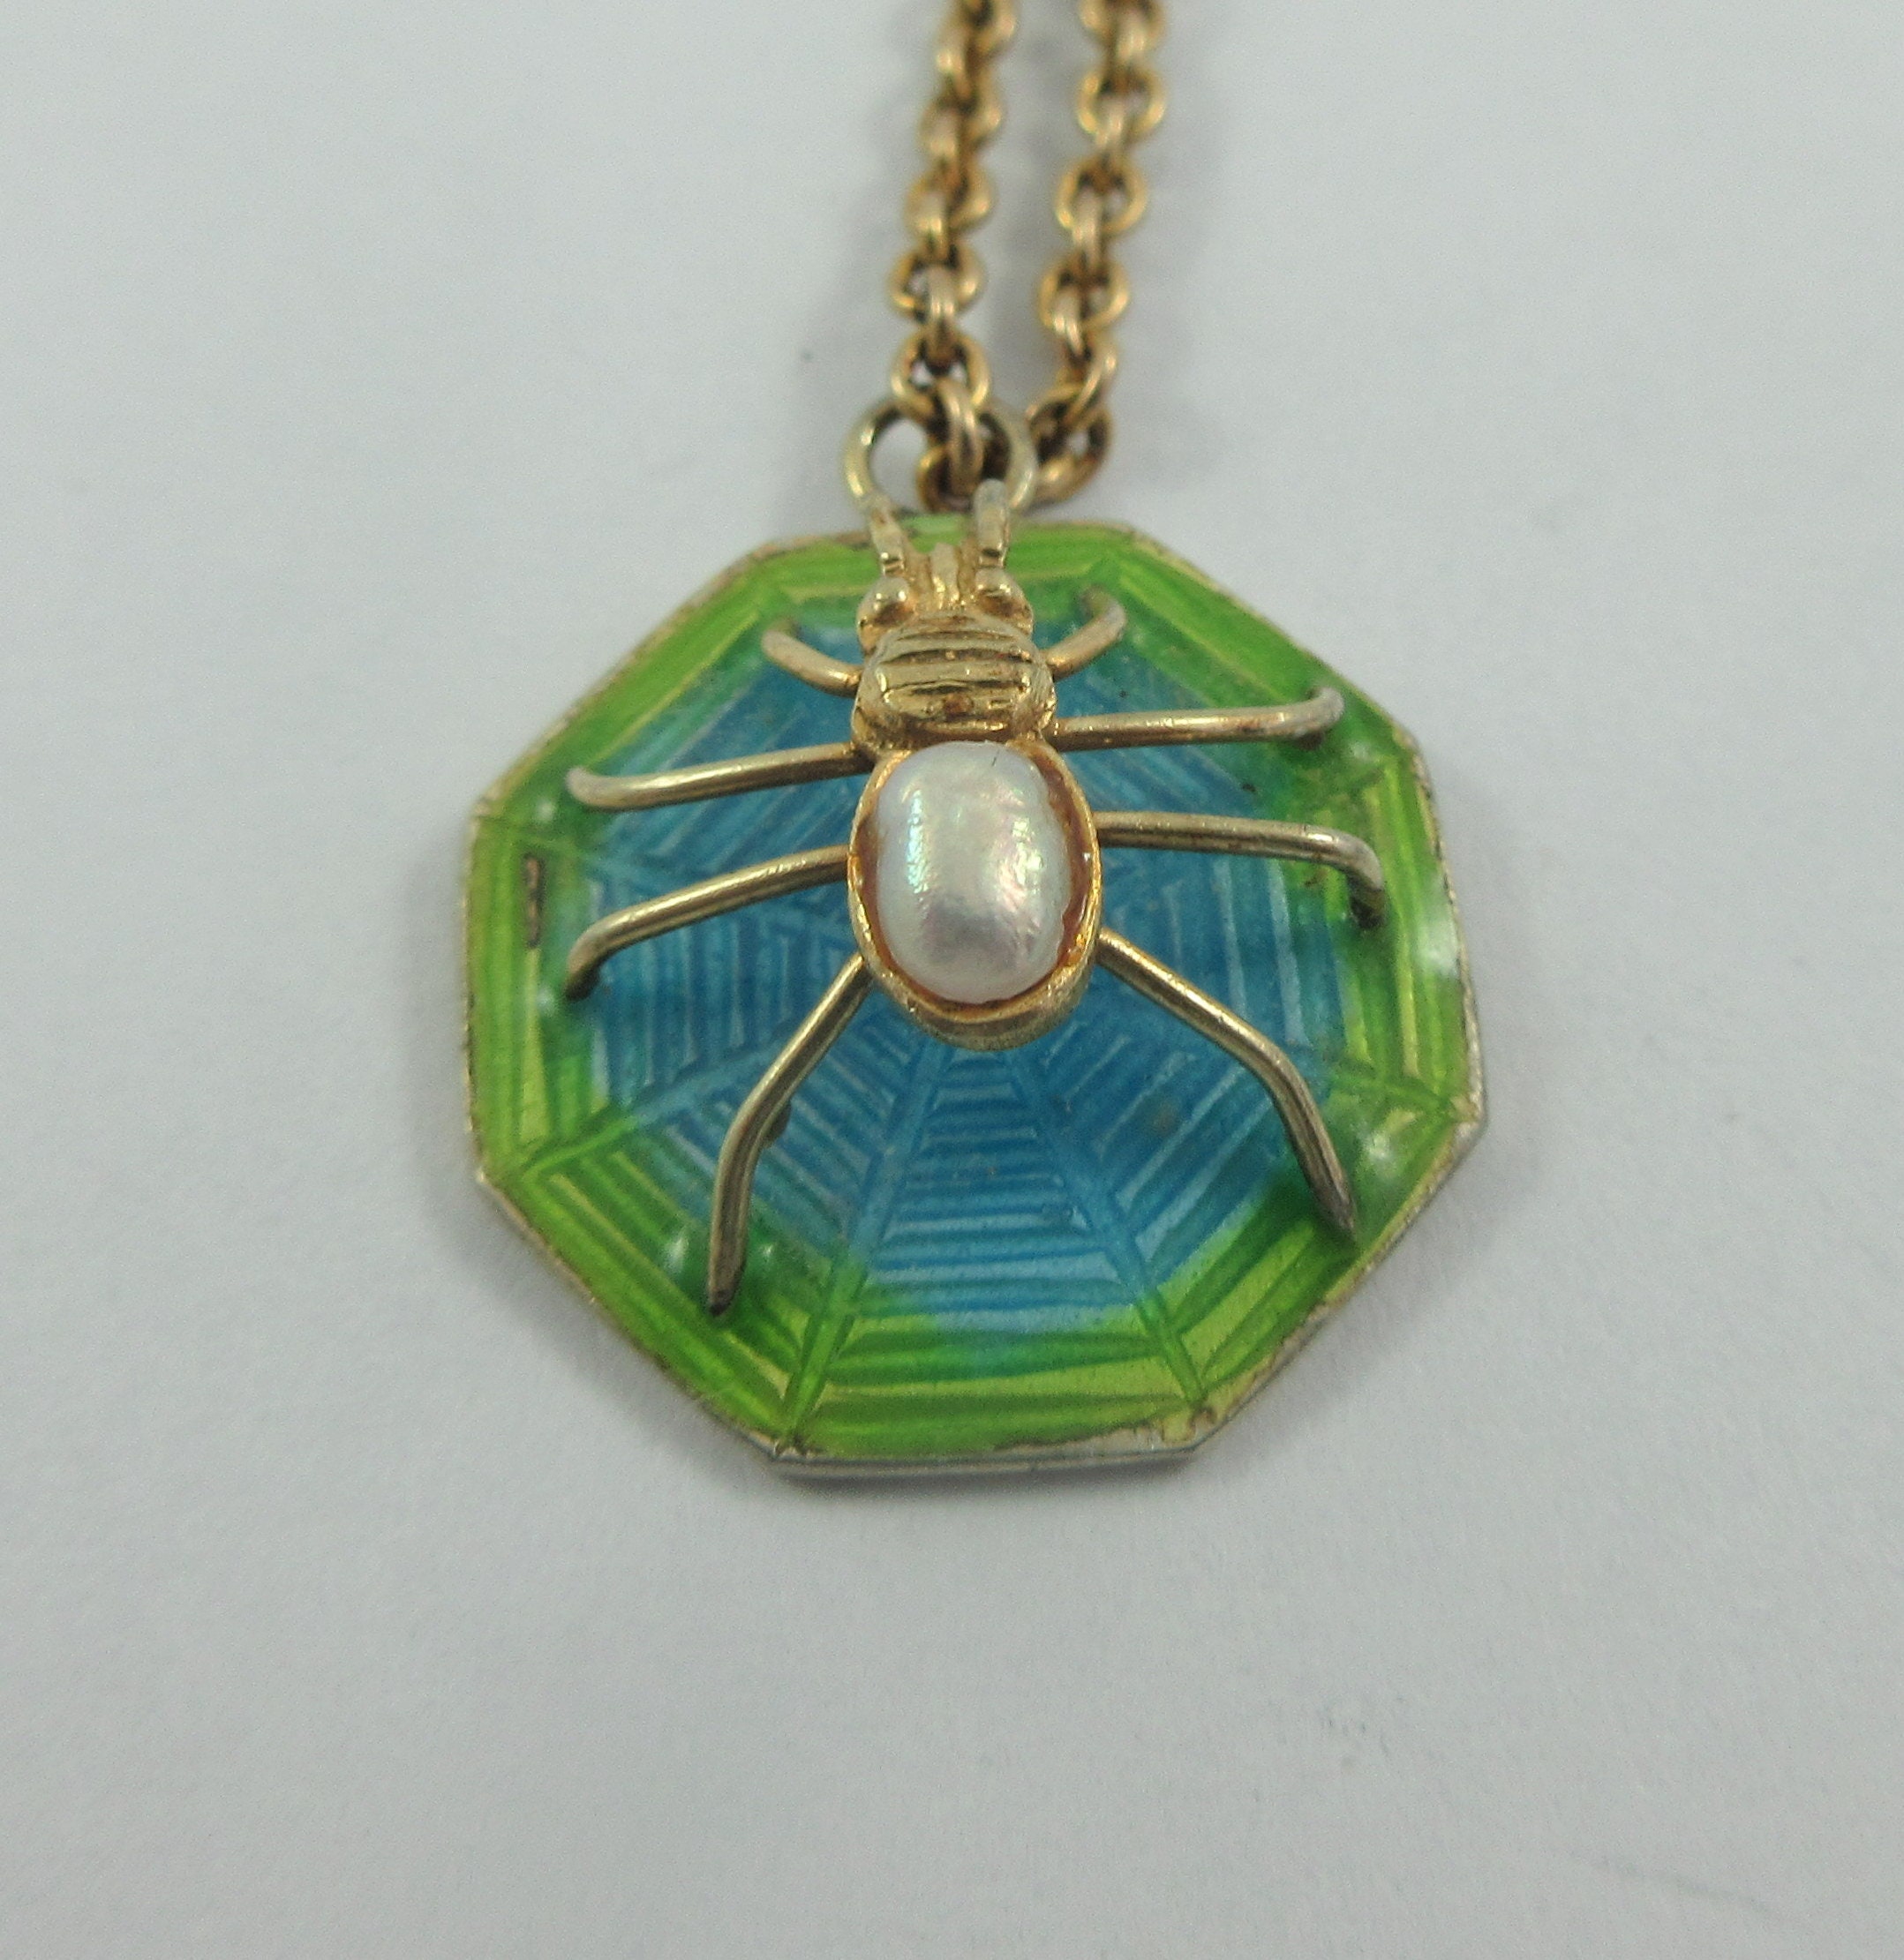 1880/1900 bubble spider charm-germany  Spider jewelry, Jewelry lookbook,  Insect jewelry